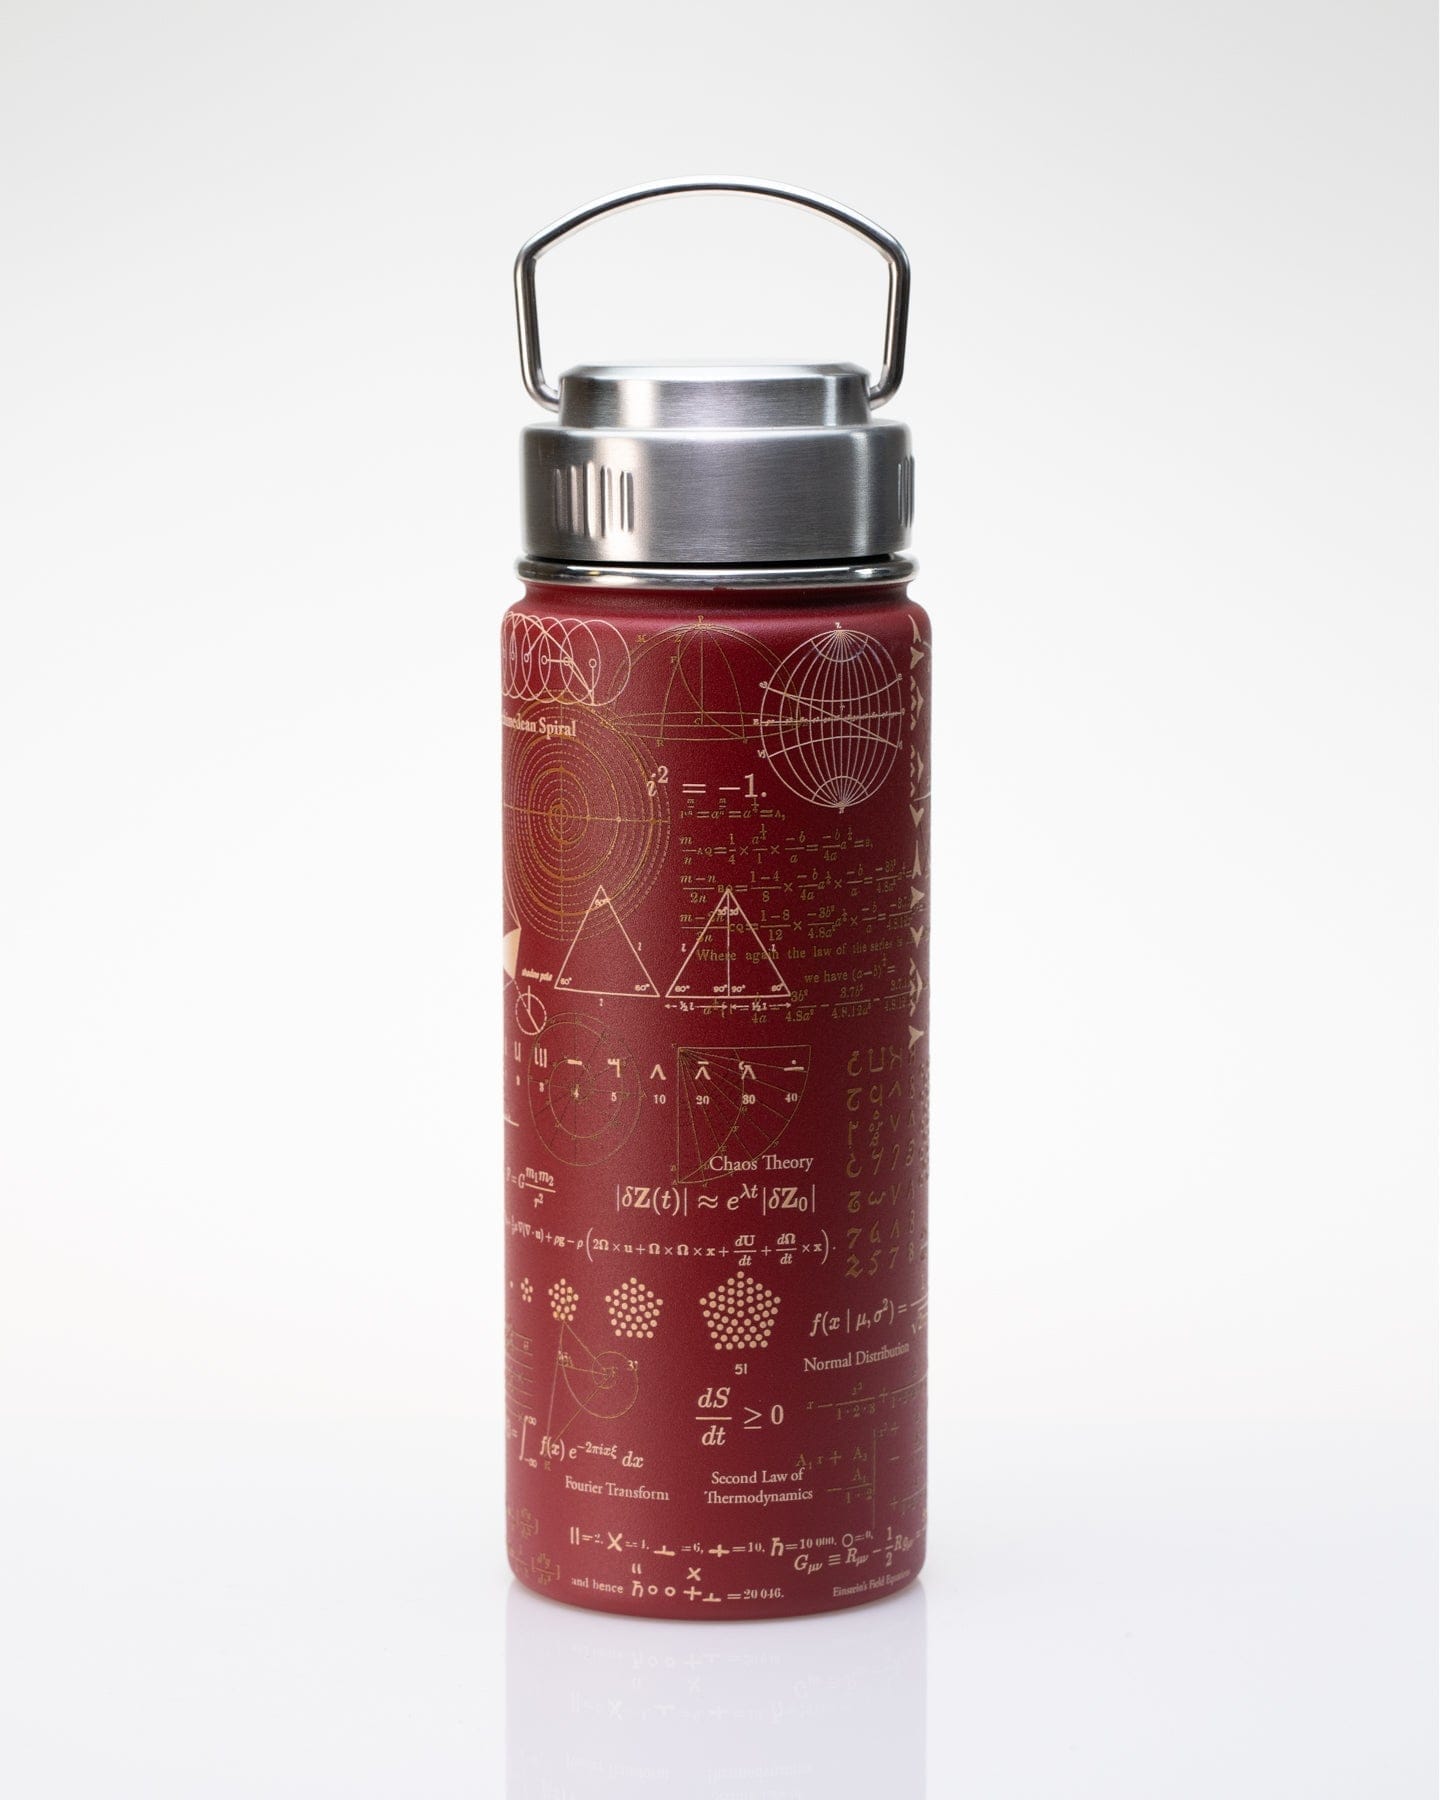 https://cdn.shopify.com/s/files/1/1055/1086/products/Equations-that-Changed-the-World-18-oz-Steel-Bottle-Cognitive-Surplus-13.jpg?crop=center&height=1871&v=1659155737&width=1440